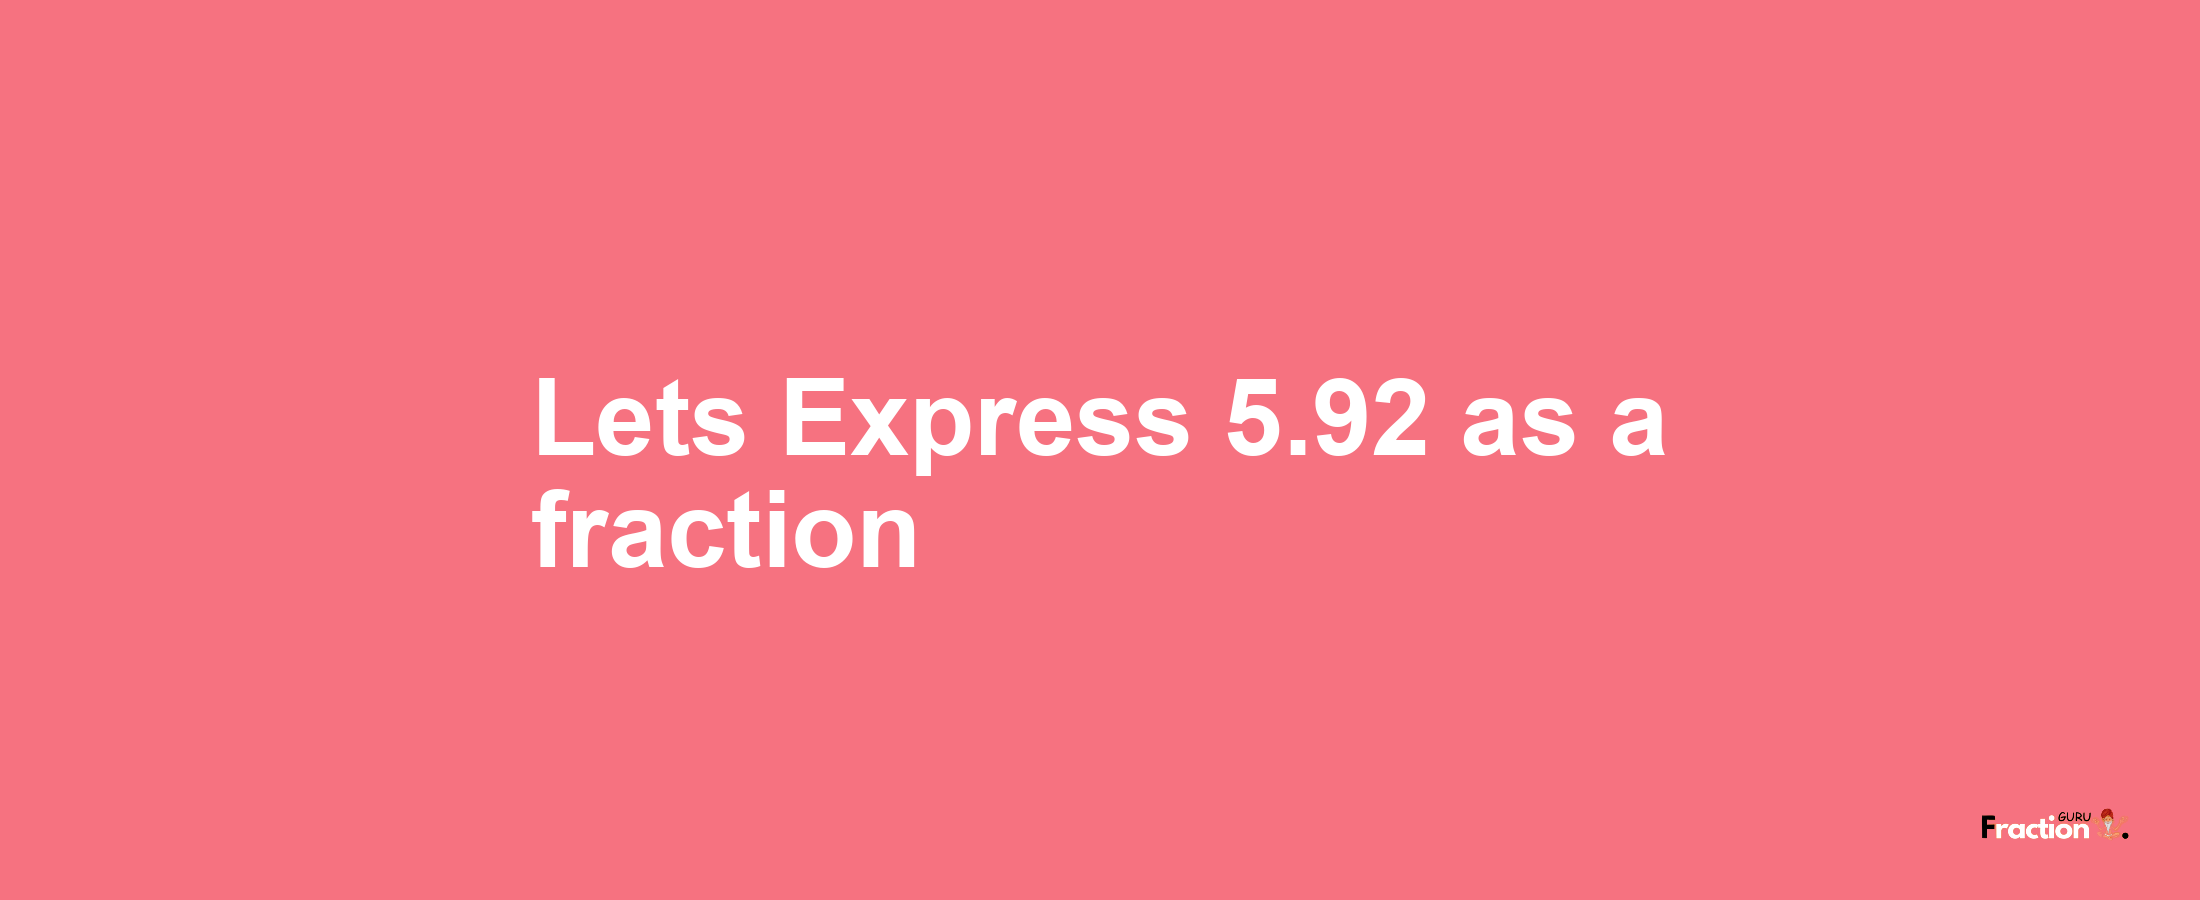 Lets Express 5.92 as afraction